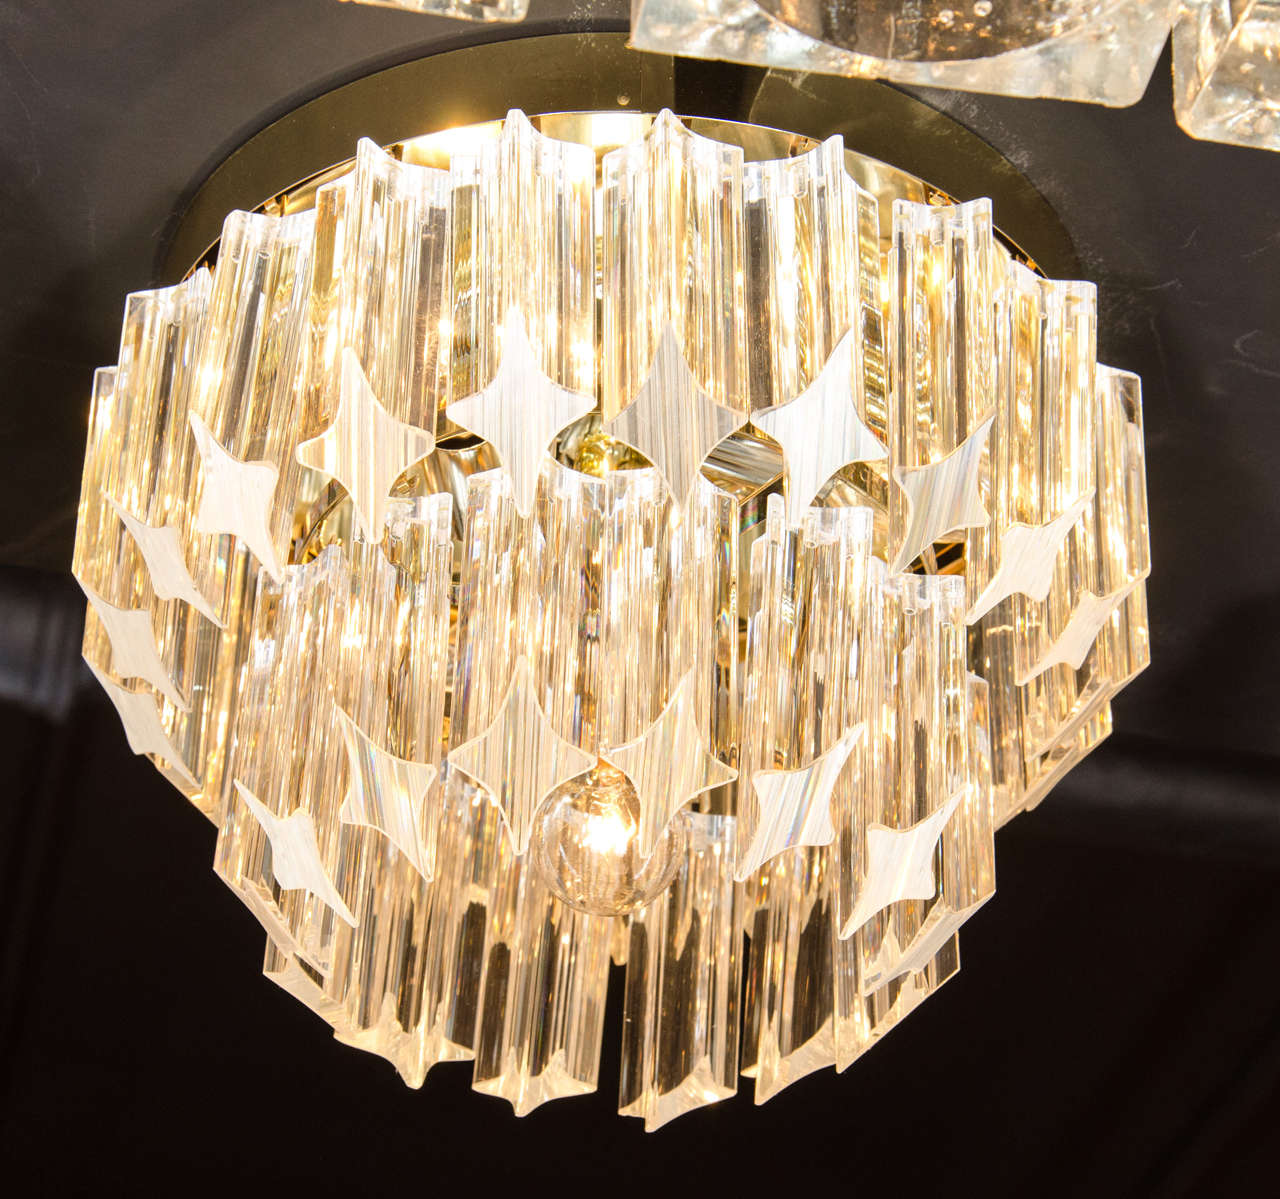 Mid-Century Modernist cut crystal flush mount chandelier by Camer. This flush mount chandelier features two tiers of cut crystal Triedre rods that have been cut at an angle and hung in a descending fashion for added dimension and style. Each tier of